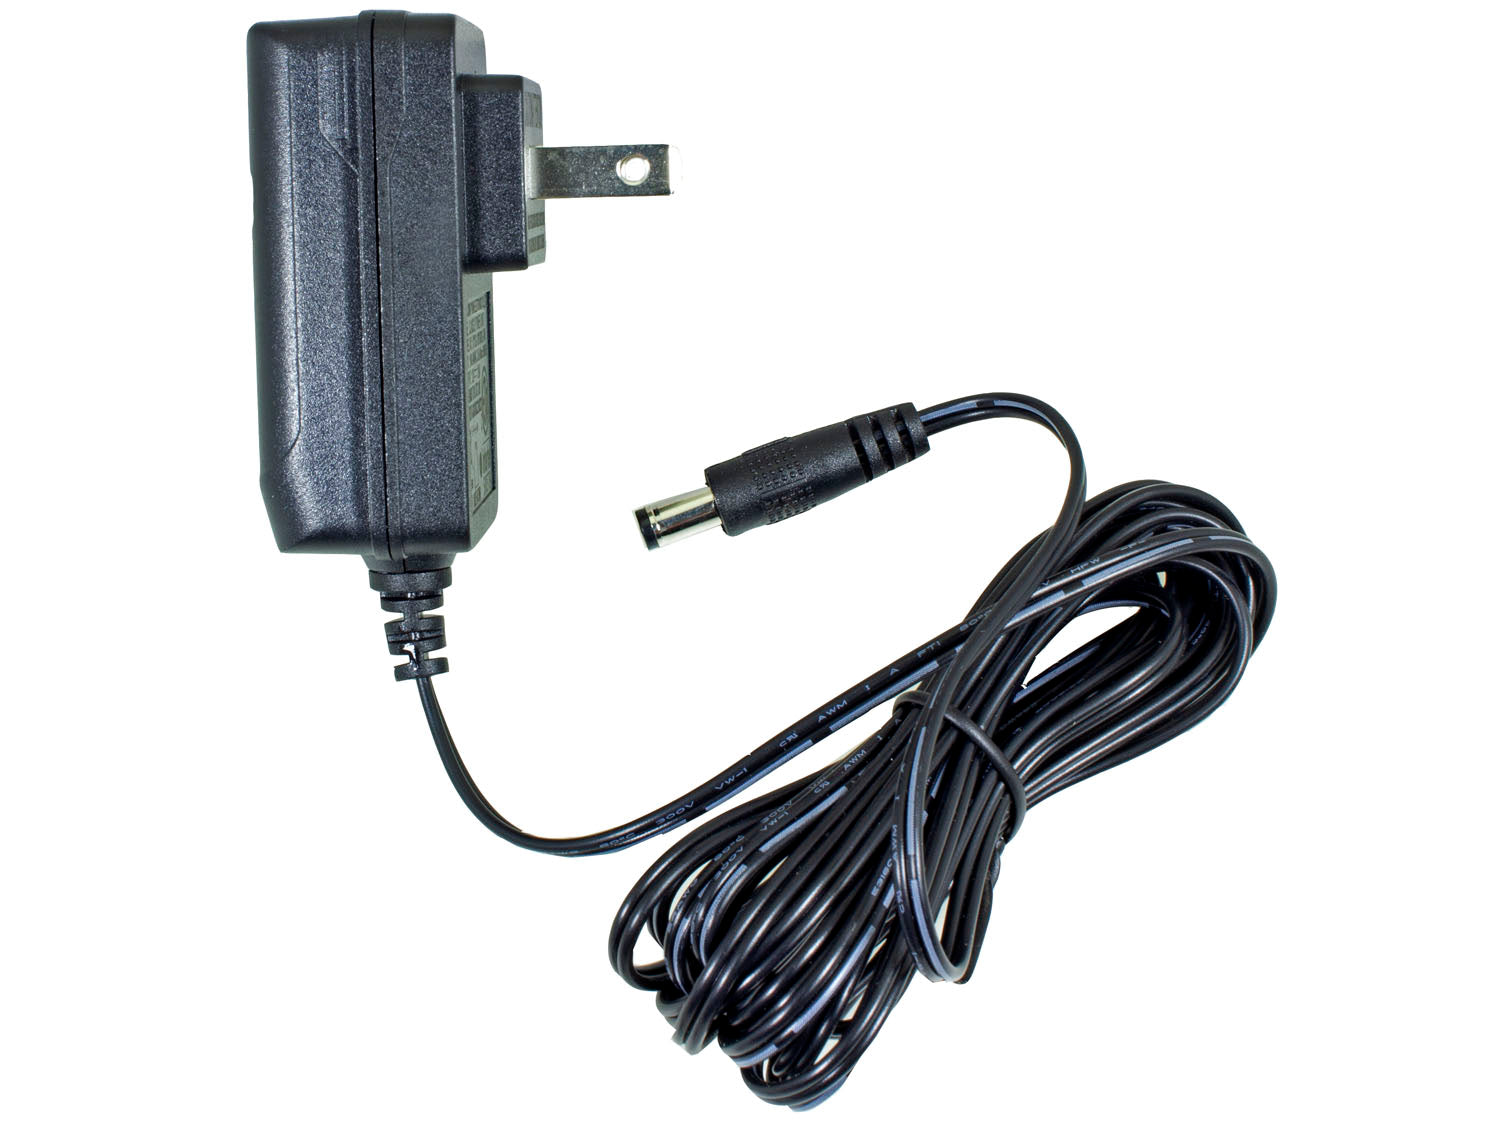 12V 1A DC US Power Supply – 3 Metre Cable